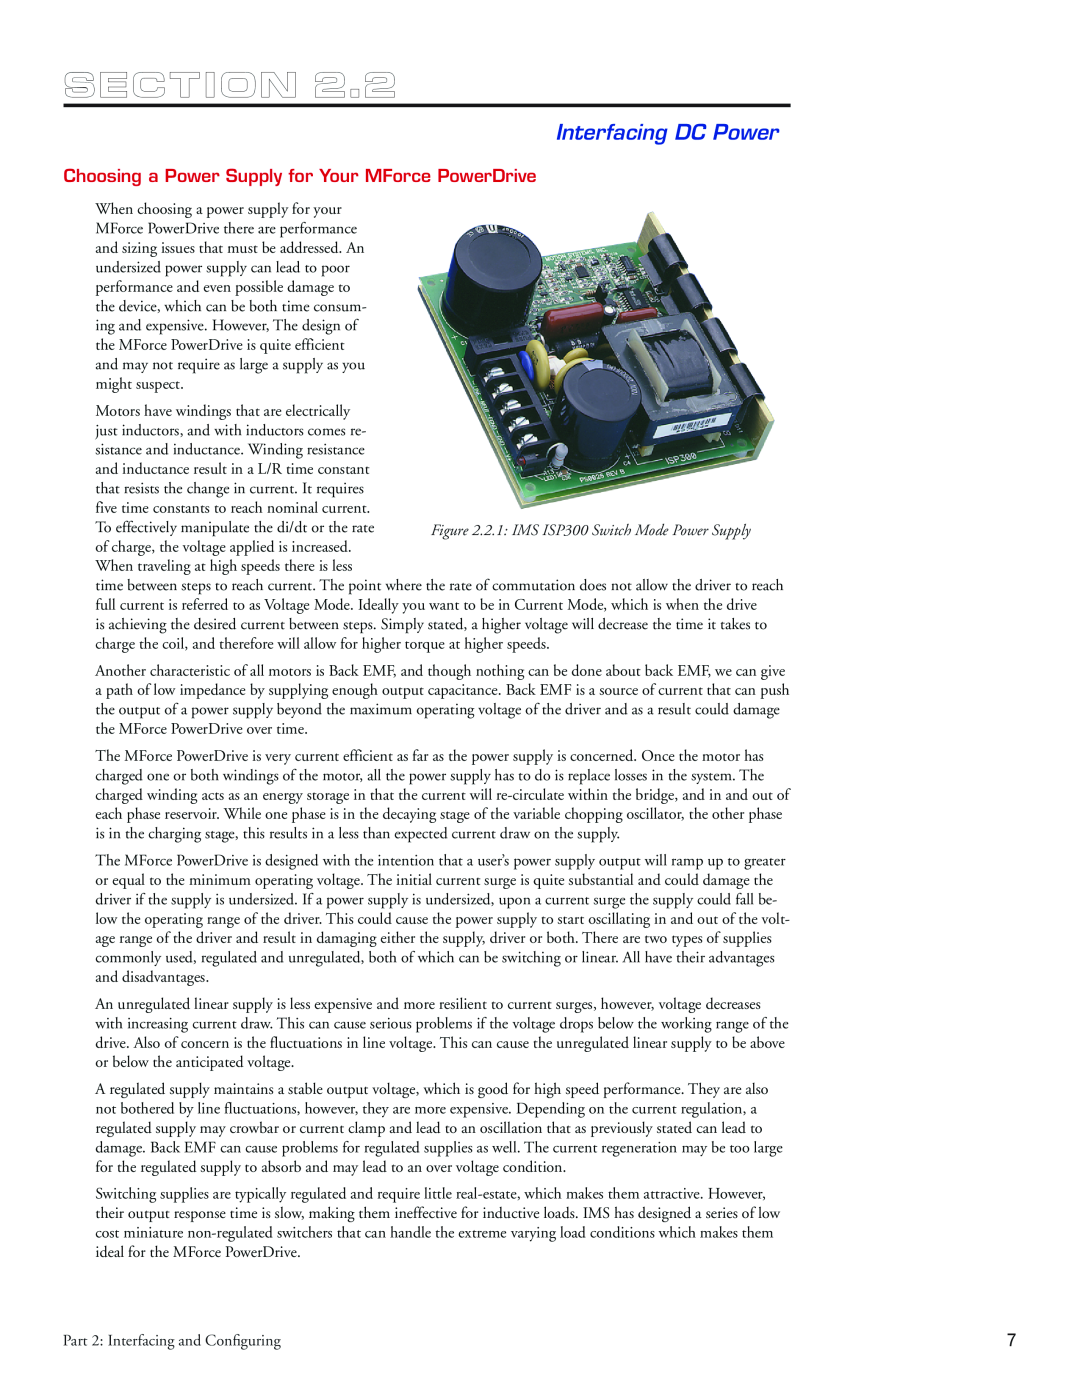 Intelligent Motion Systems Motion Detector operating instructions Interfacing DC Power, Section 